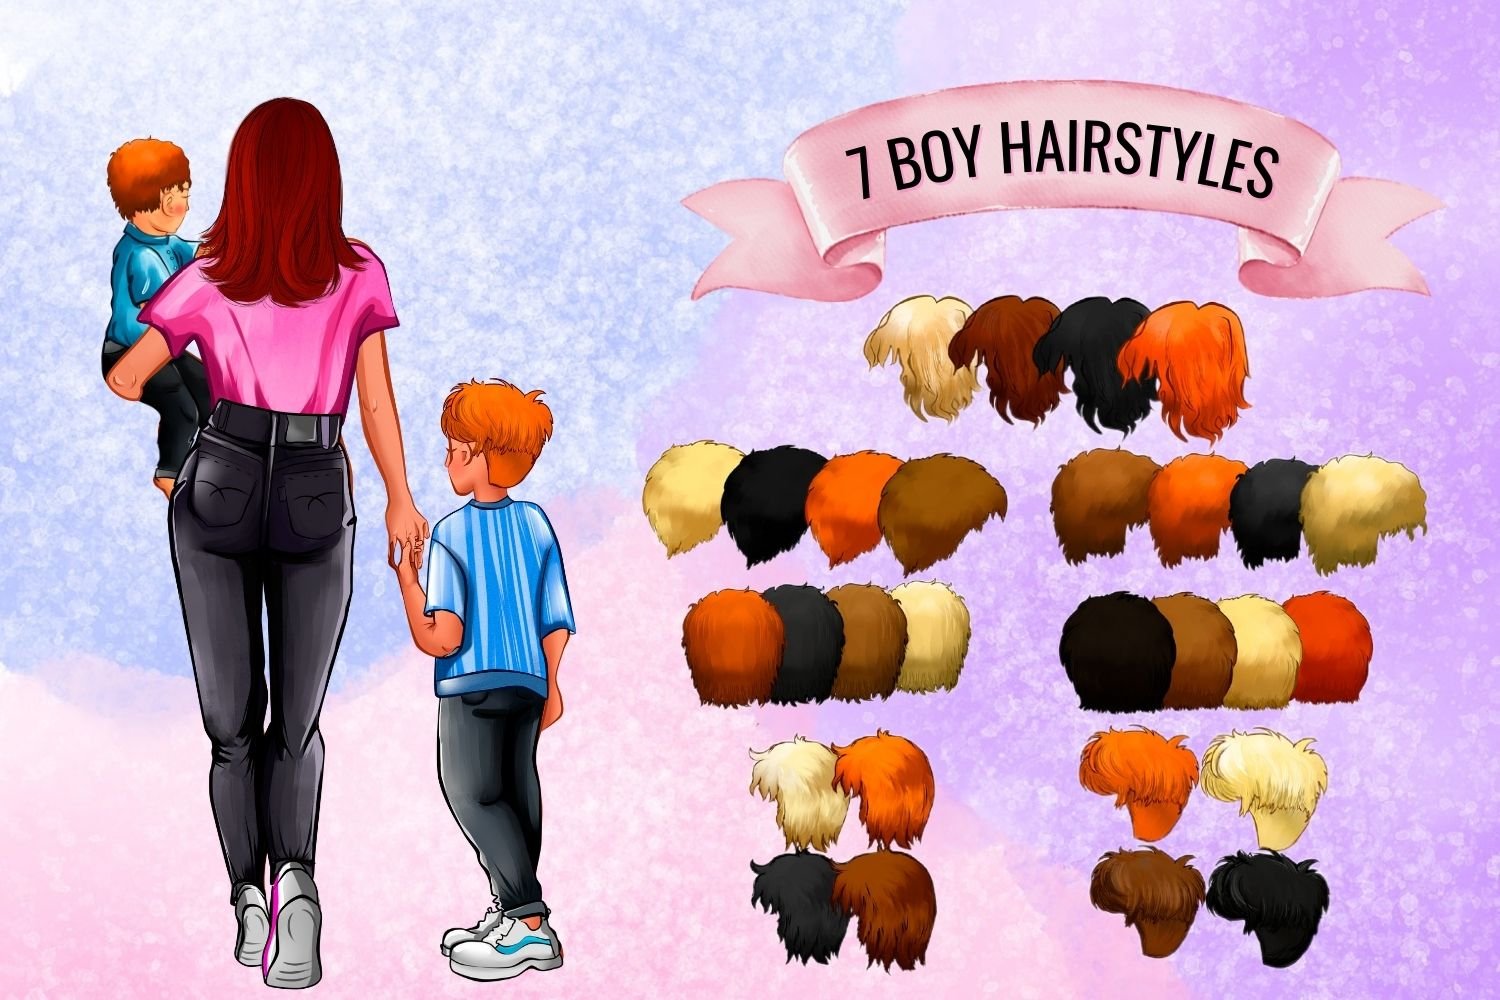 Boy hairstyle collection.